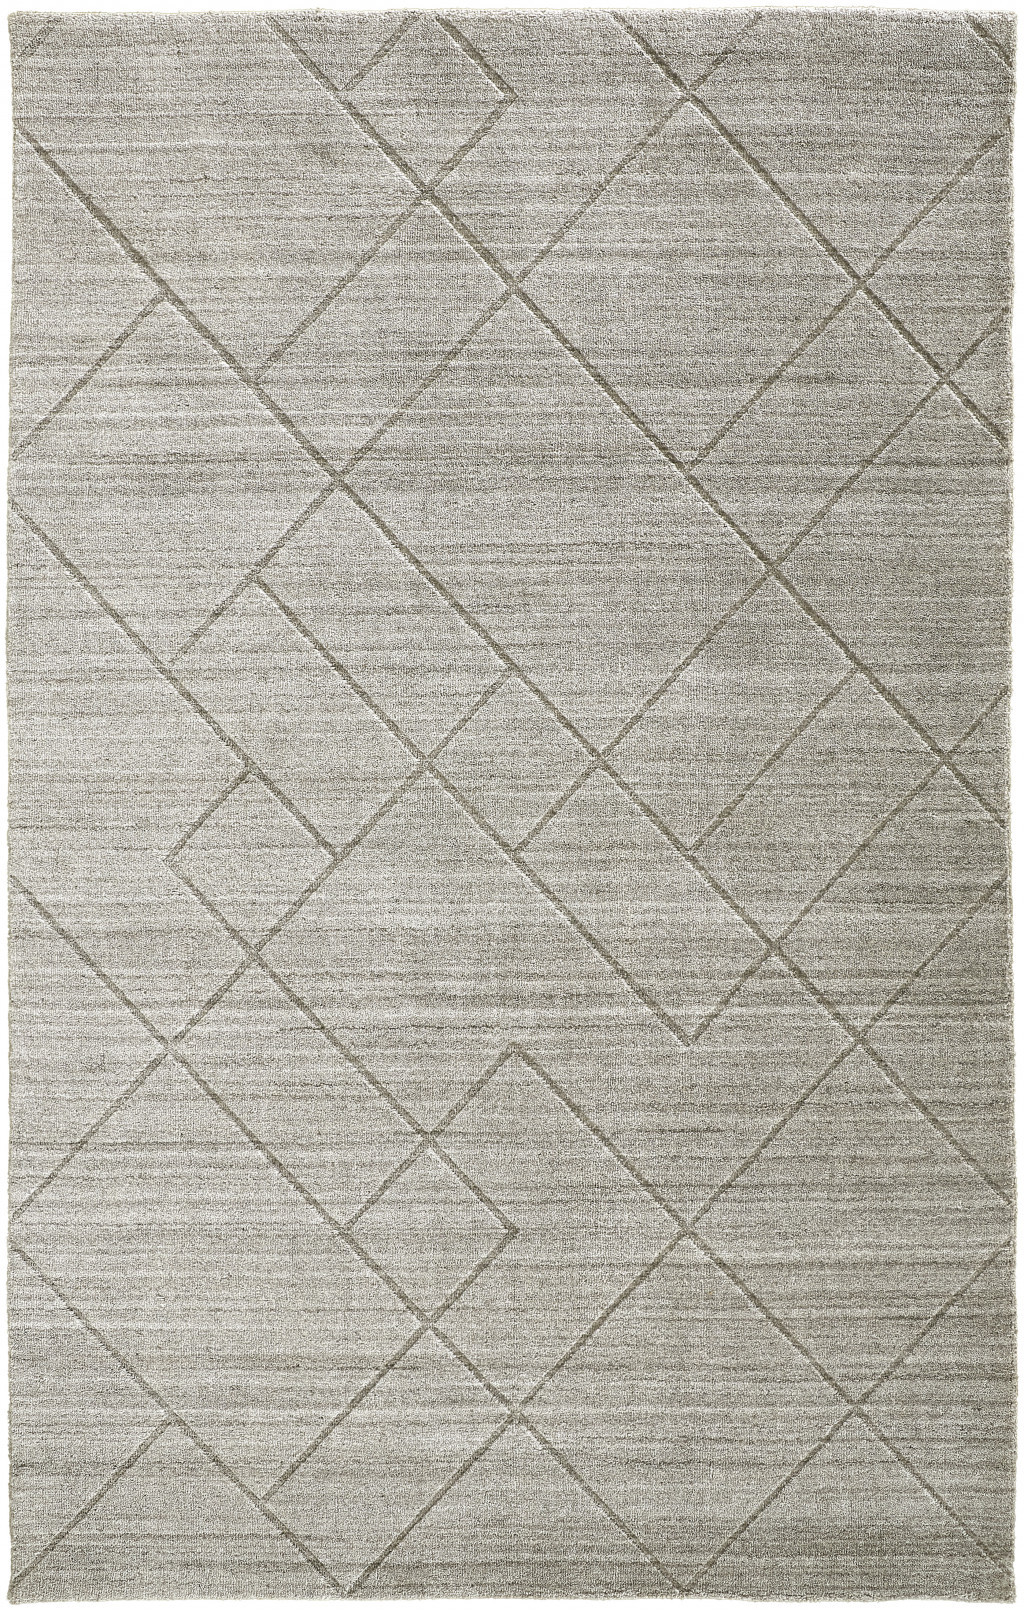 2' X 3' Ivory And Silver Striped Hand Woven Area Rug-514790-1